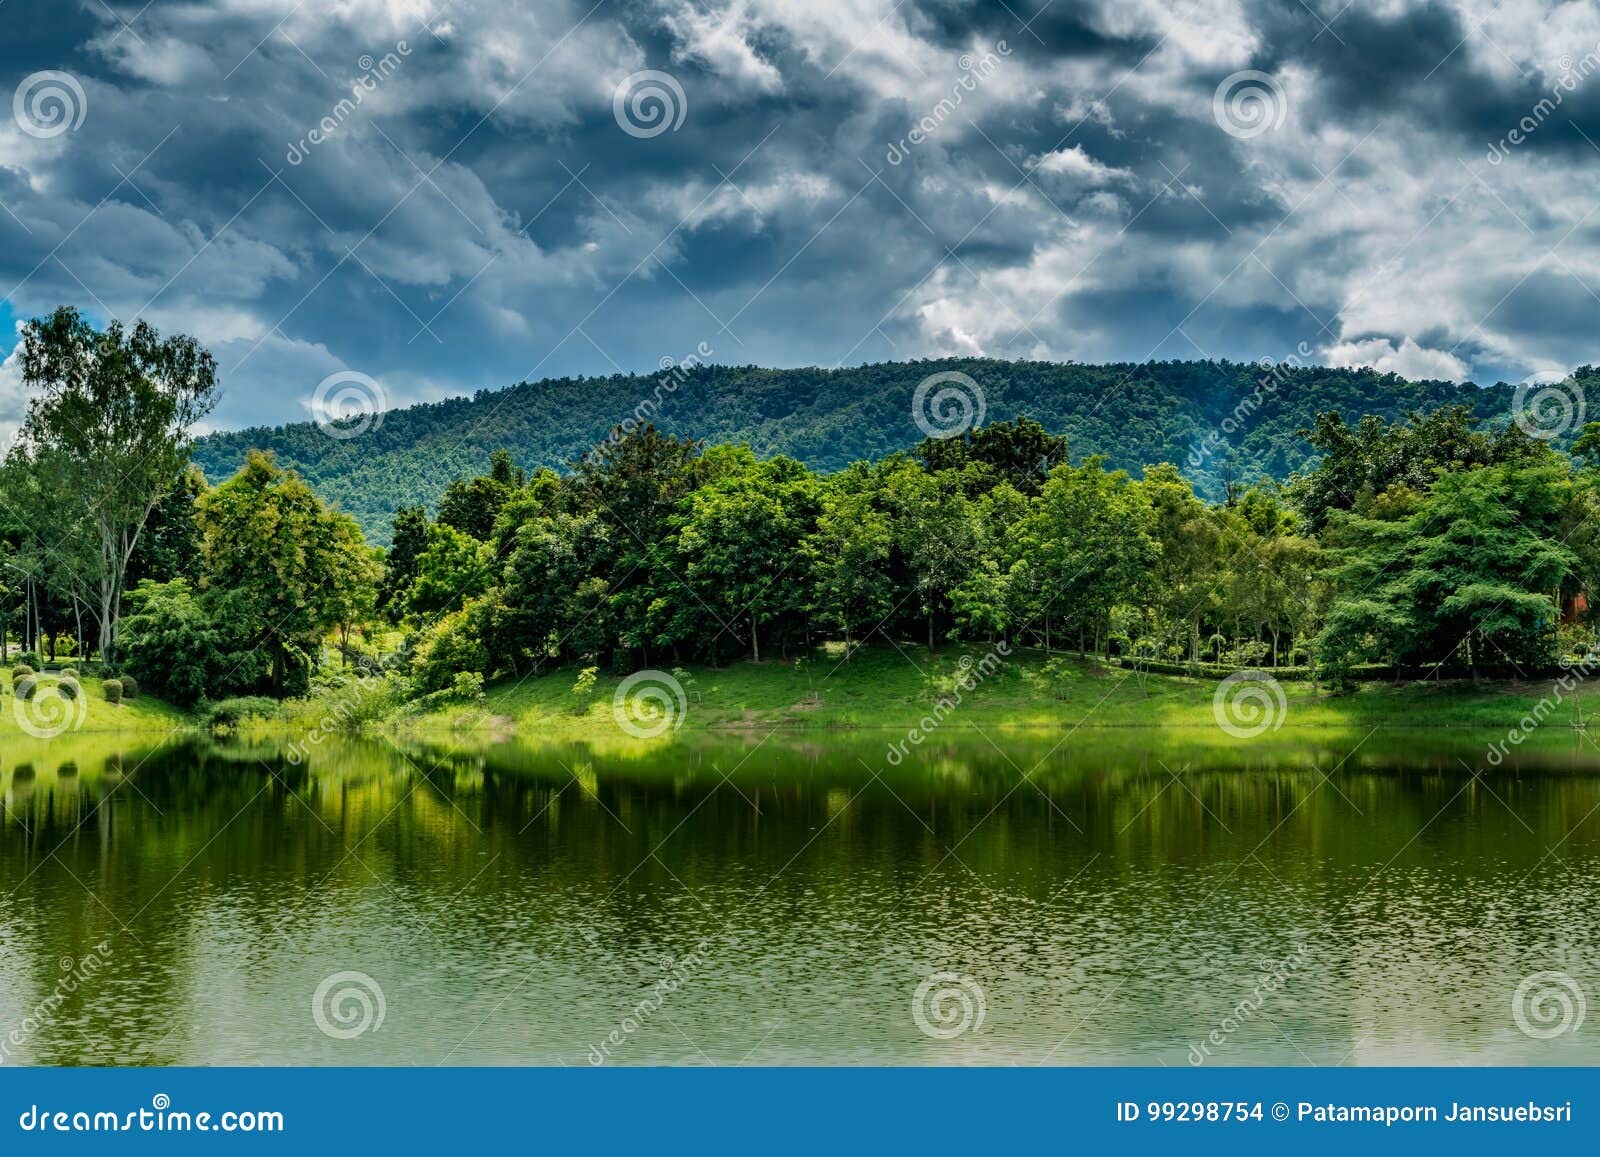 Mountain Trees and Green Lake Stock Photo - Image of landscape, forest ...